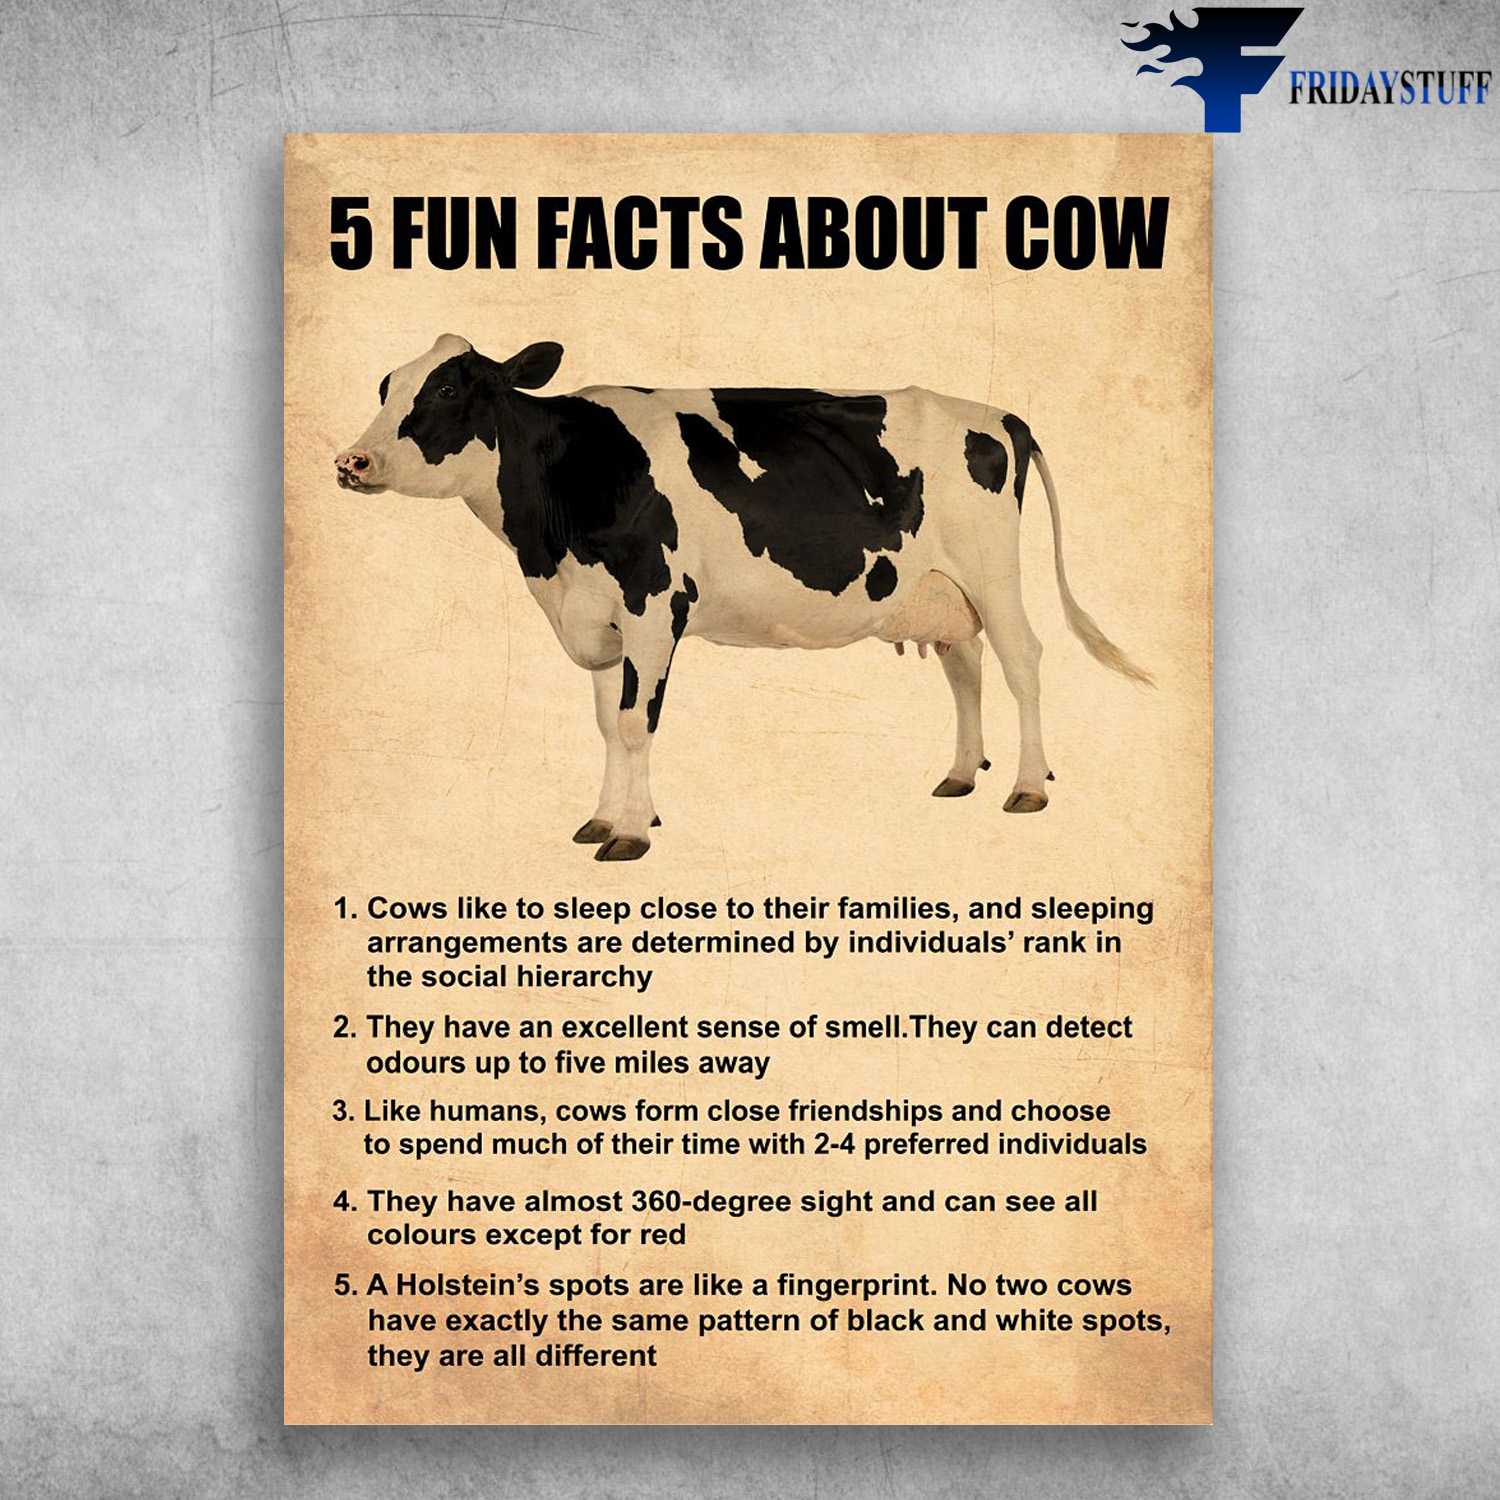 Dairy Cow Fun Fact - 5 Fun Facts About Cow, Cows Like Sleep Close To Their Families, And Sleeping Arrangements Are Determined, By Individuals' Rank In The Social Hierachy